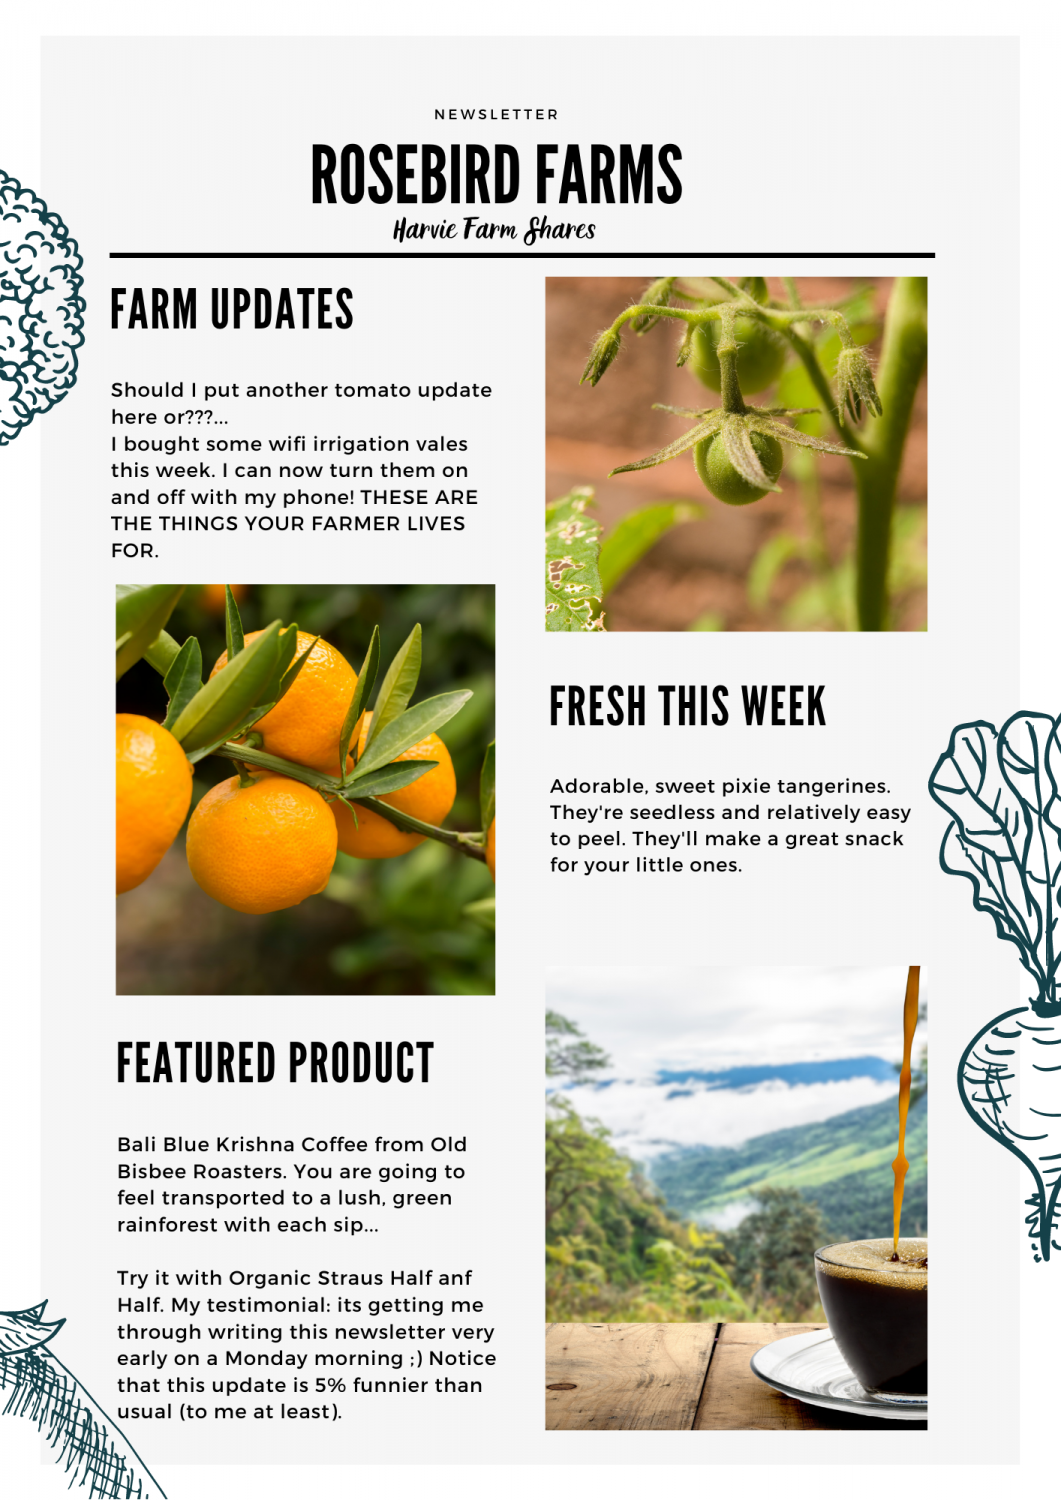 Next Happening: Farm Happenings for May 6, 2021